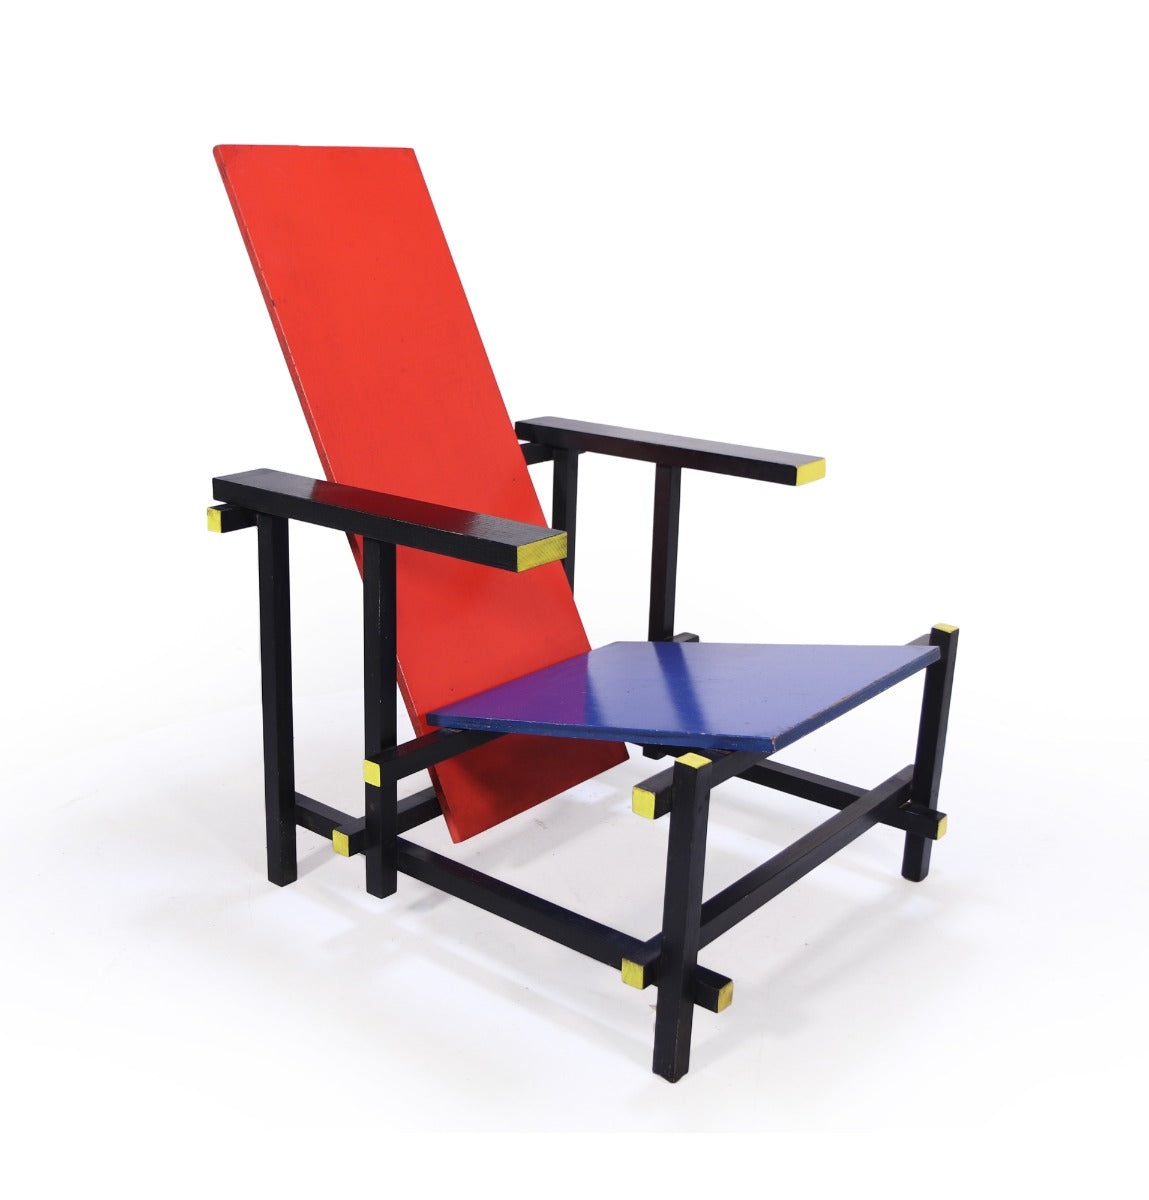 The Red Blue Chair by Gerrit Rietveld c1970 – The Furniture Rooms